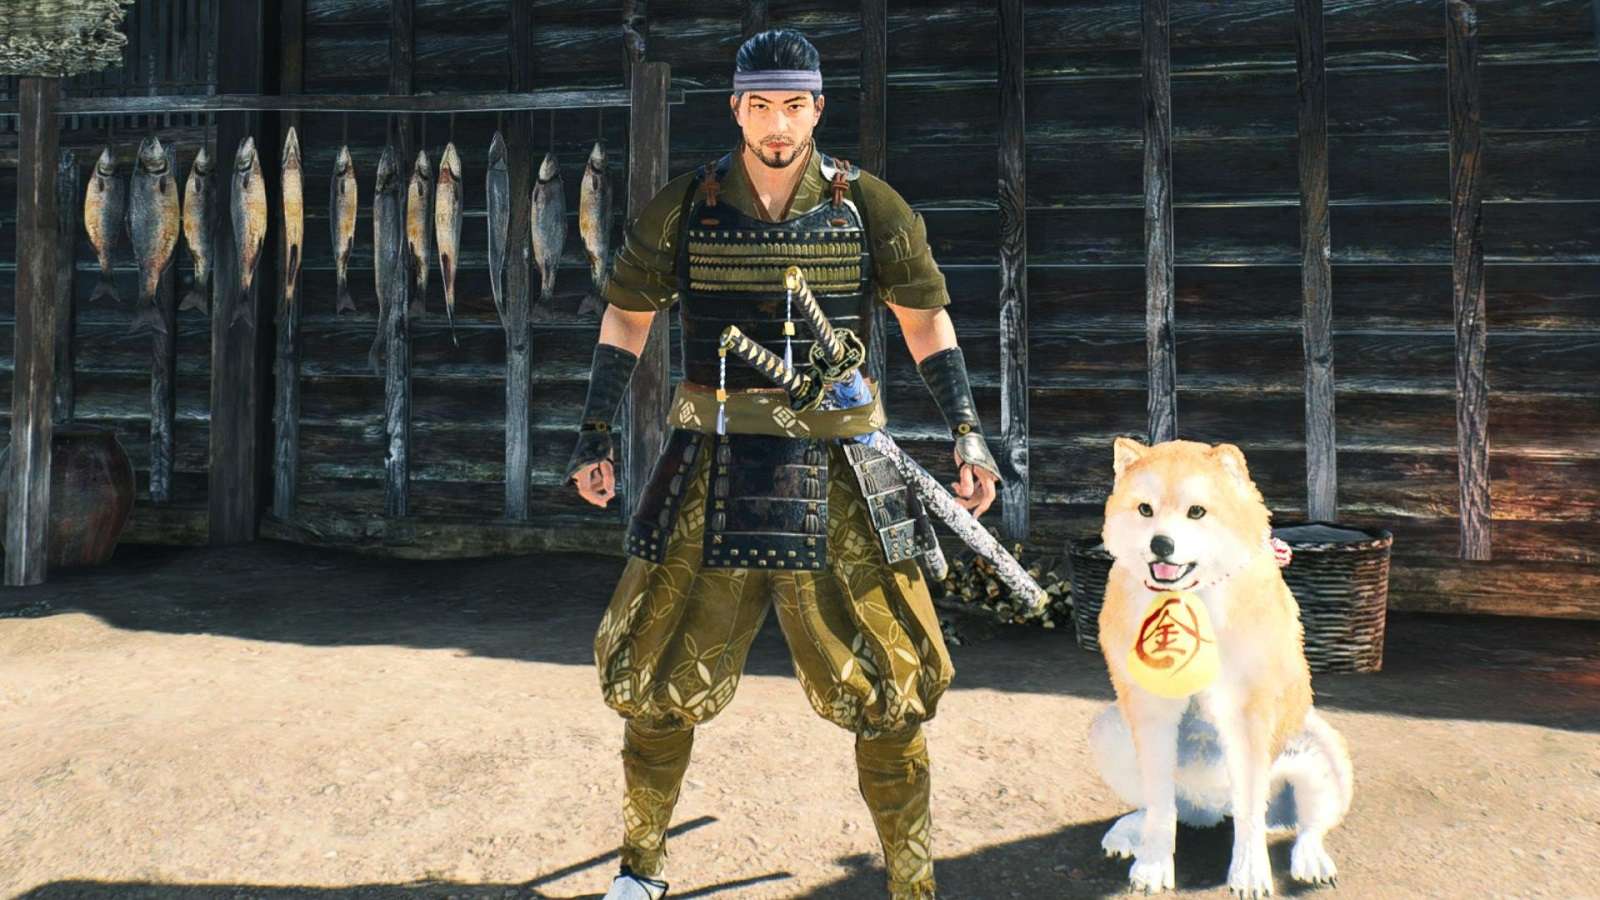 Ronin standing next to a dog